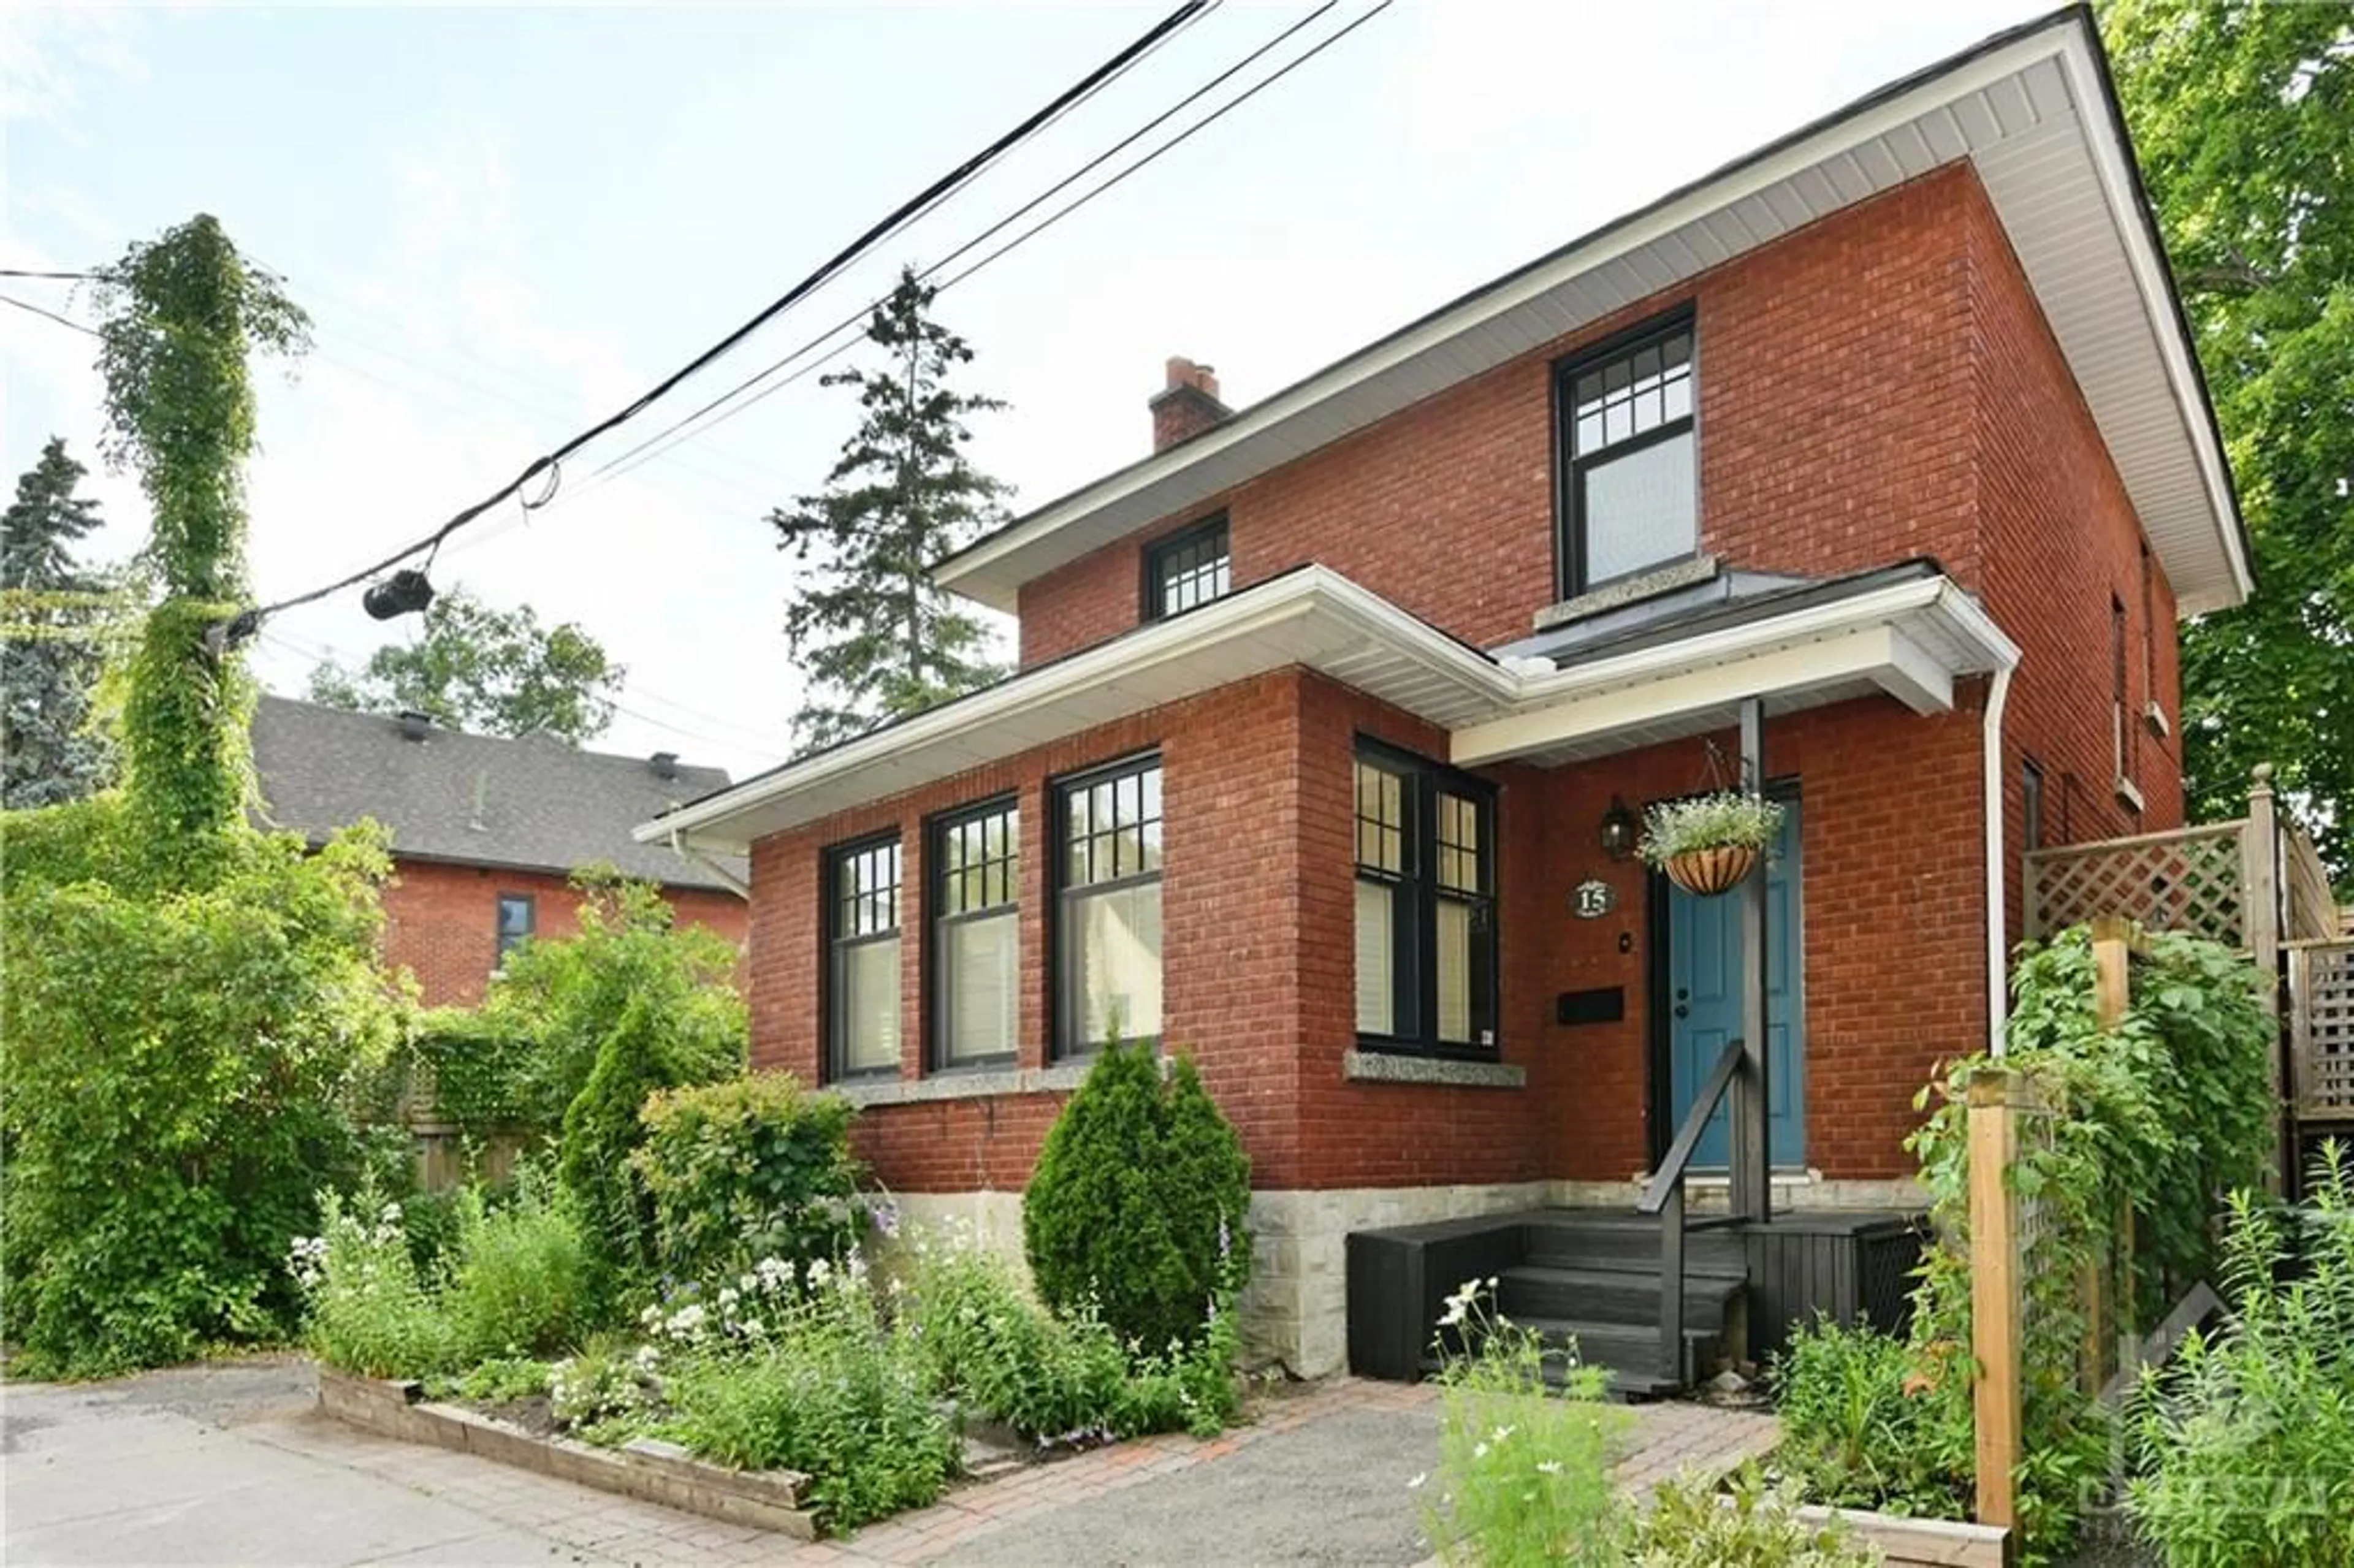 Home with brick exterior material for 15 CHESLEY St, Ottawa Ontario K1S 3C1